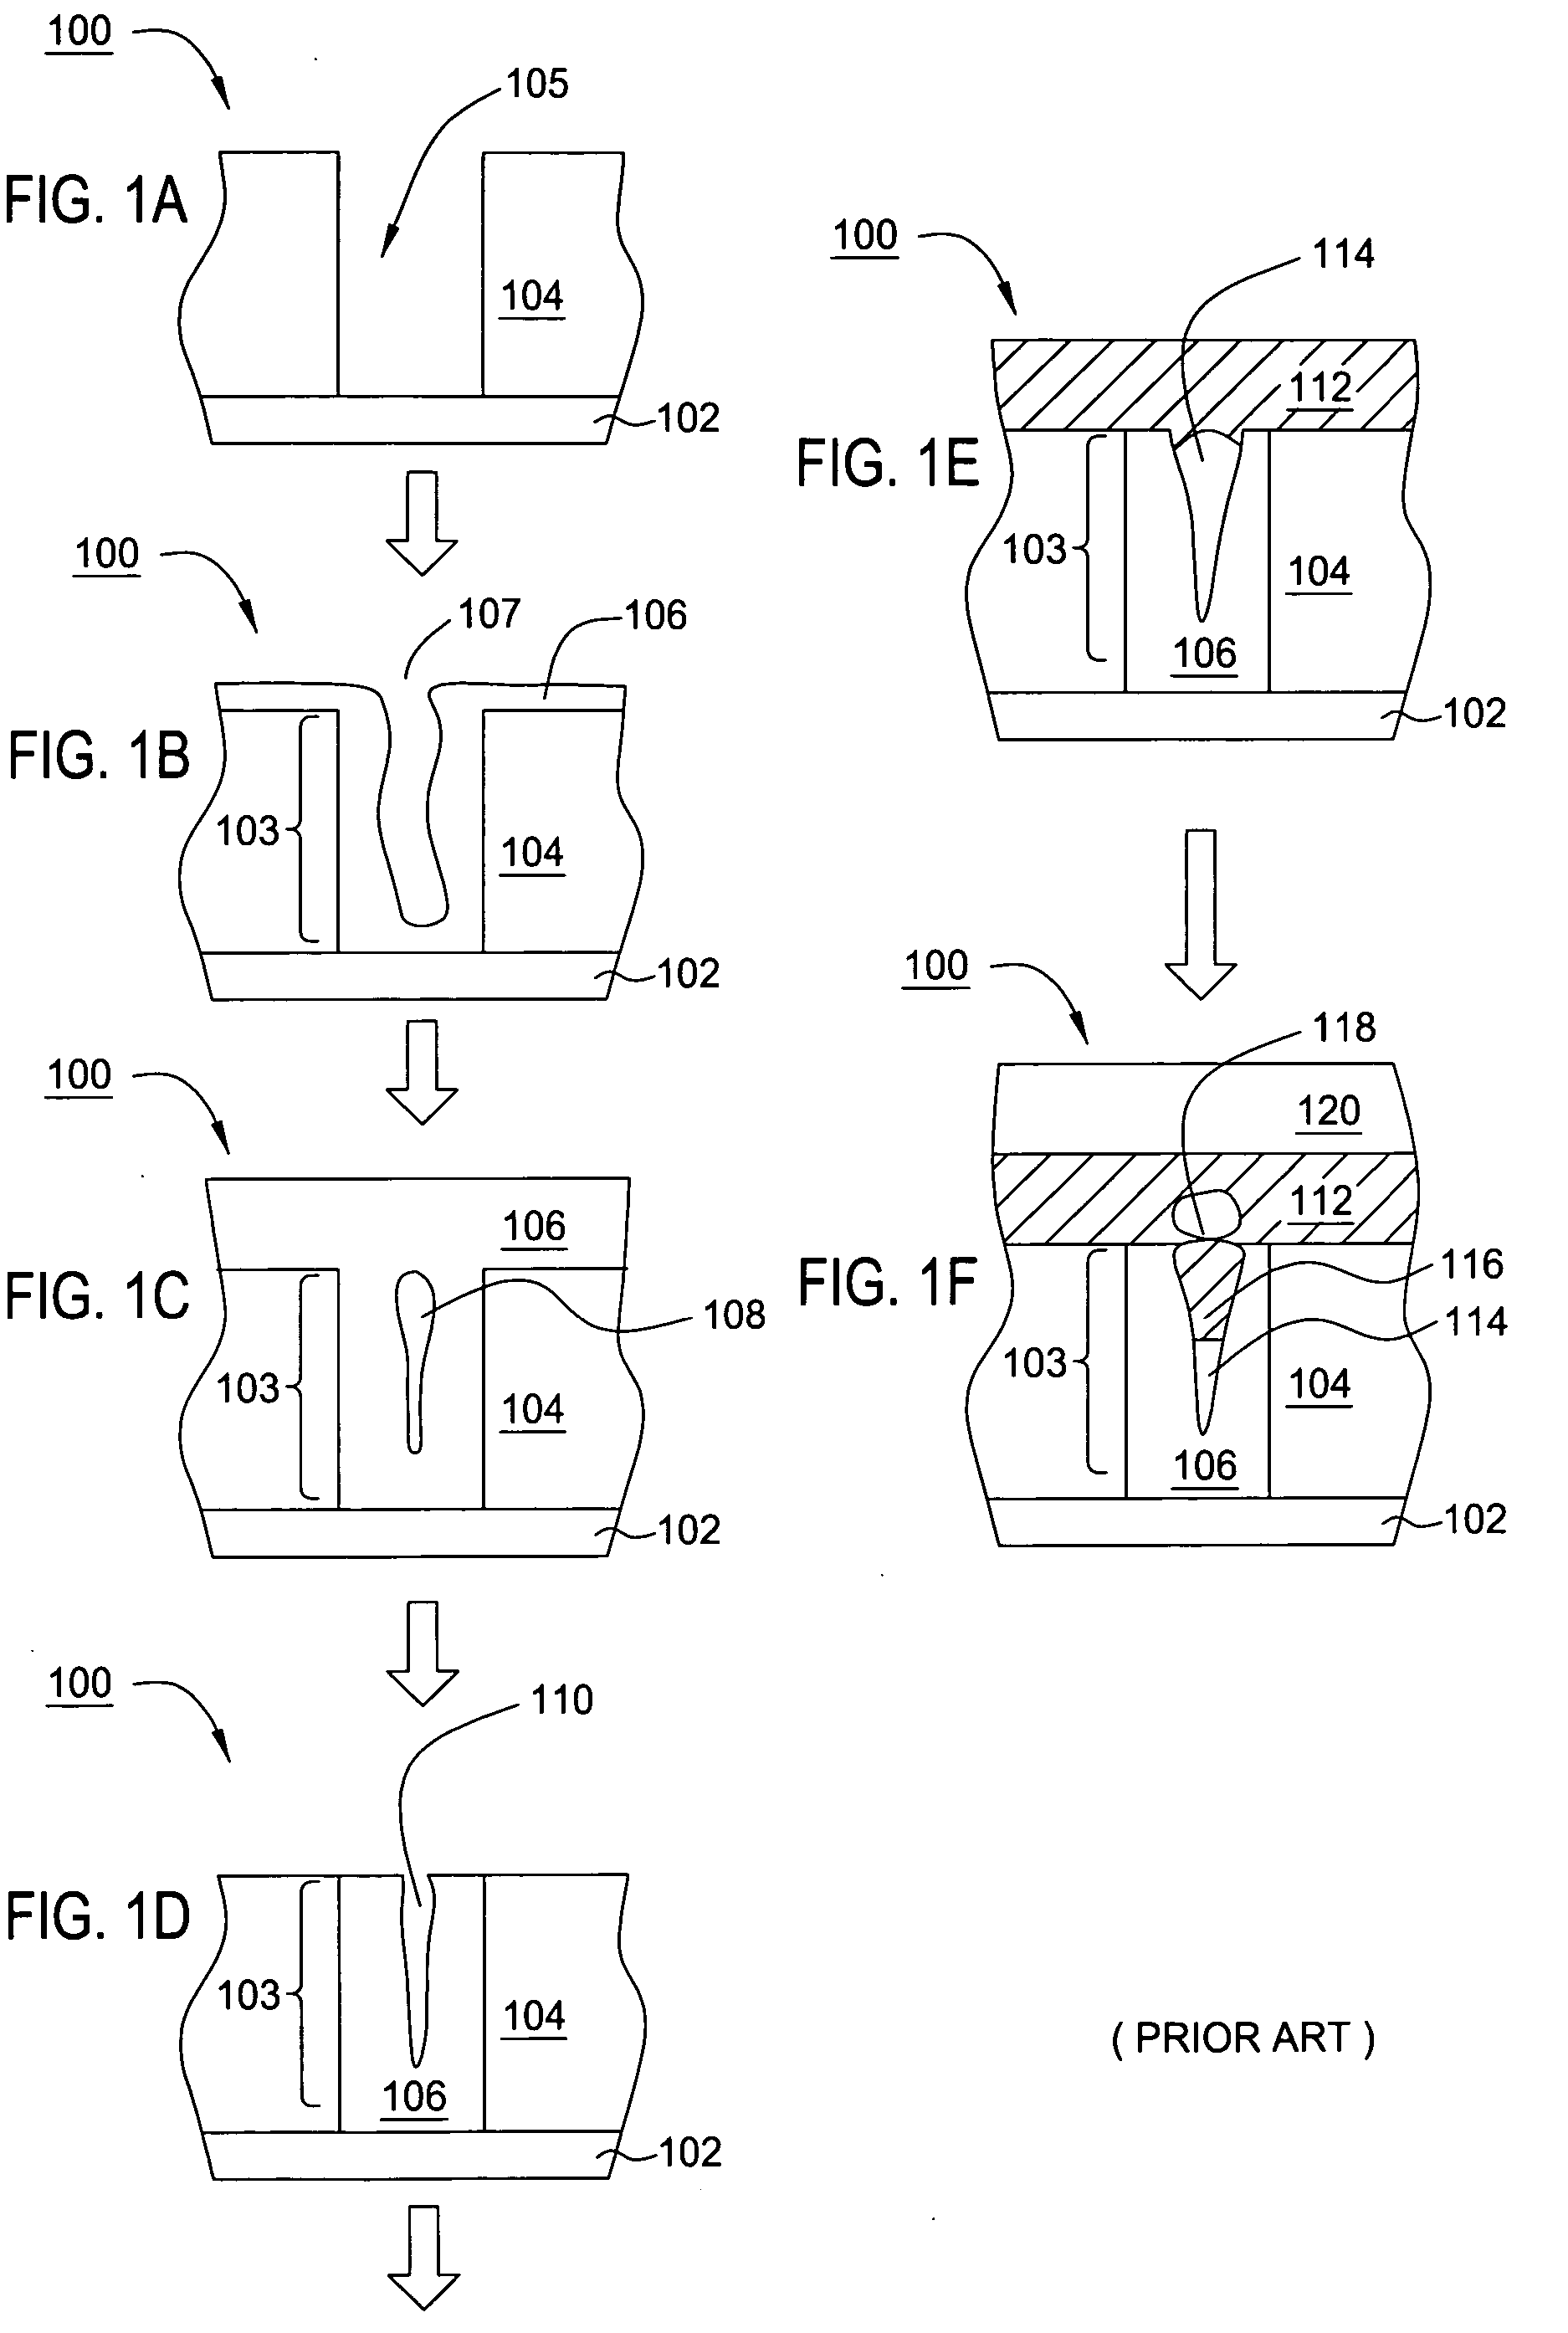 Electroless deposition process on a silicide contact